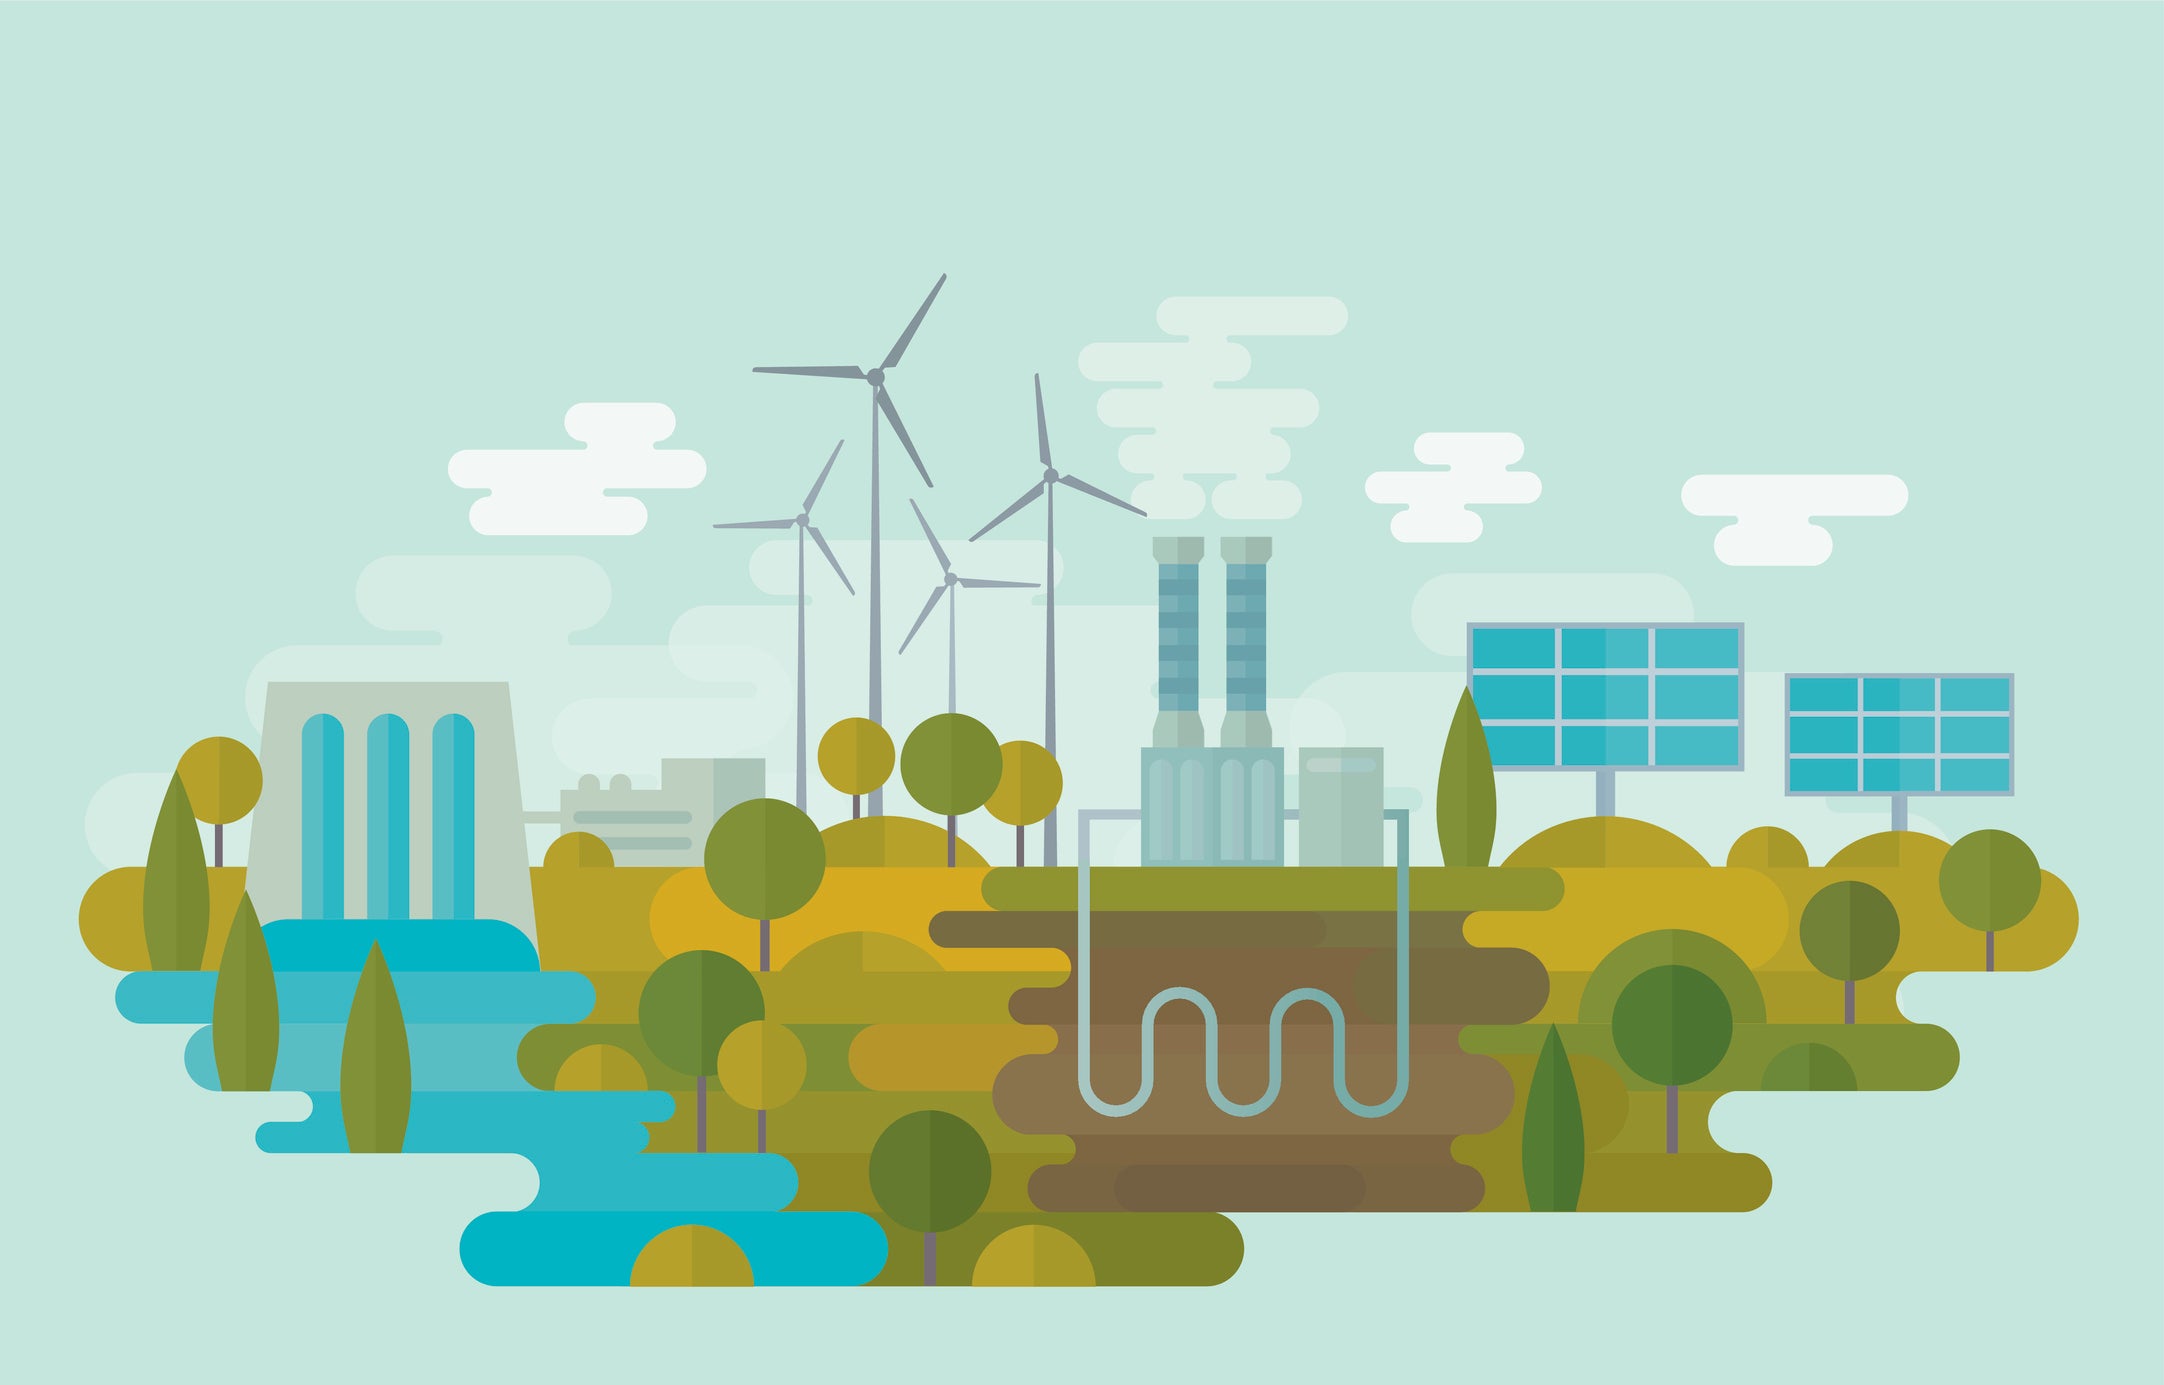 Illustration showing alternative clean energy sources: hydro energy, wind energy, geothermal energy, and solar energy.